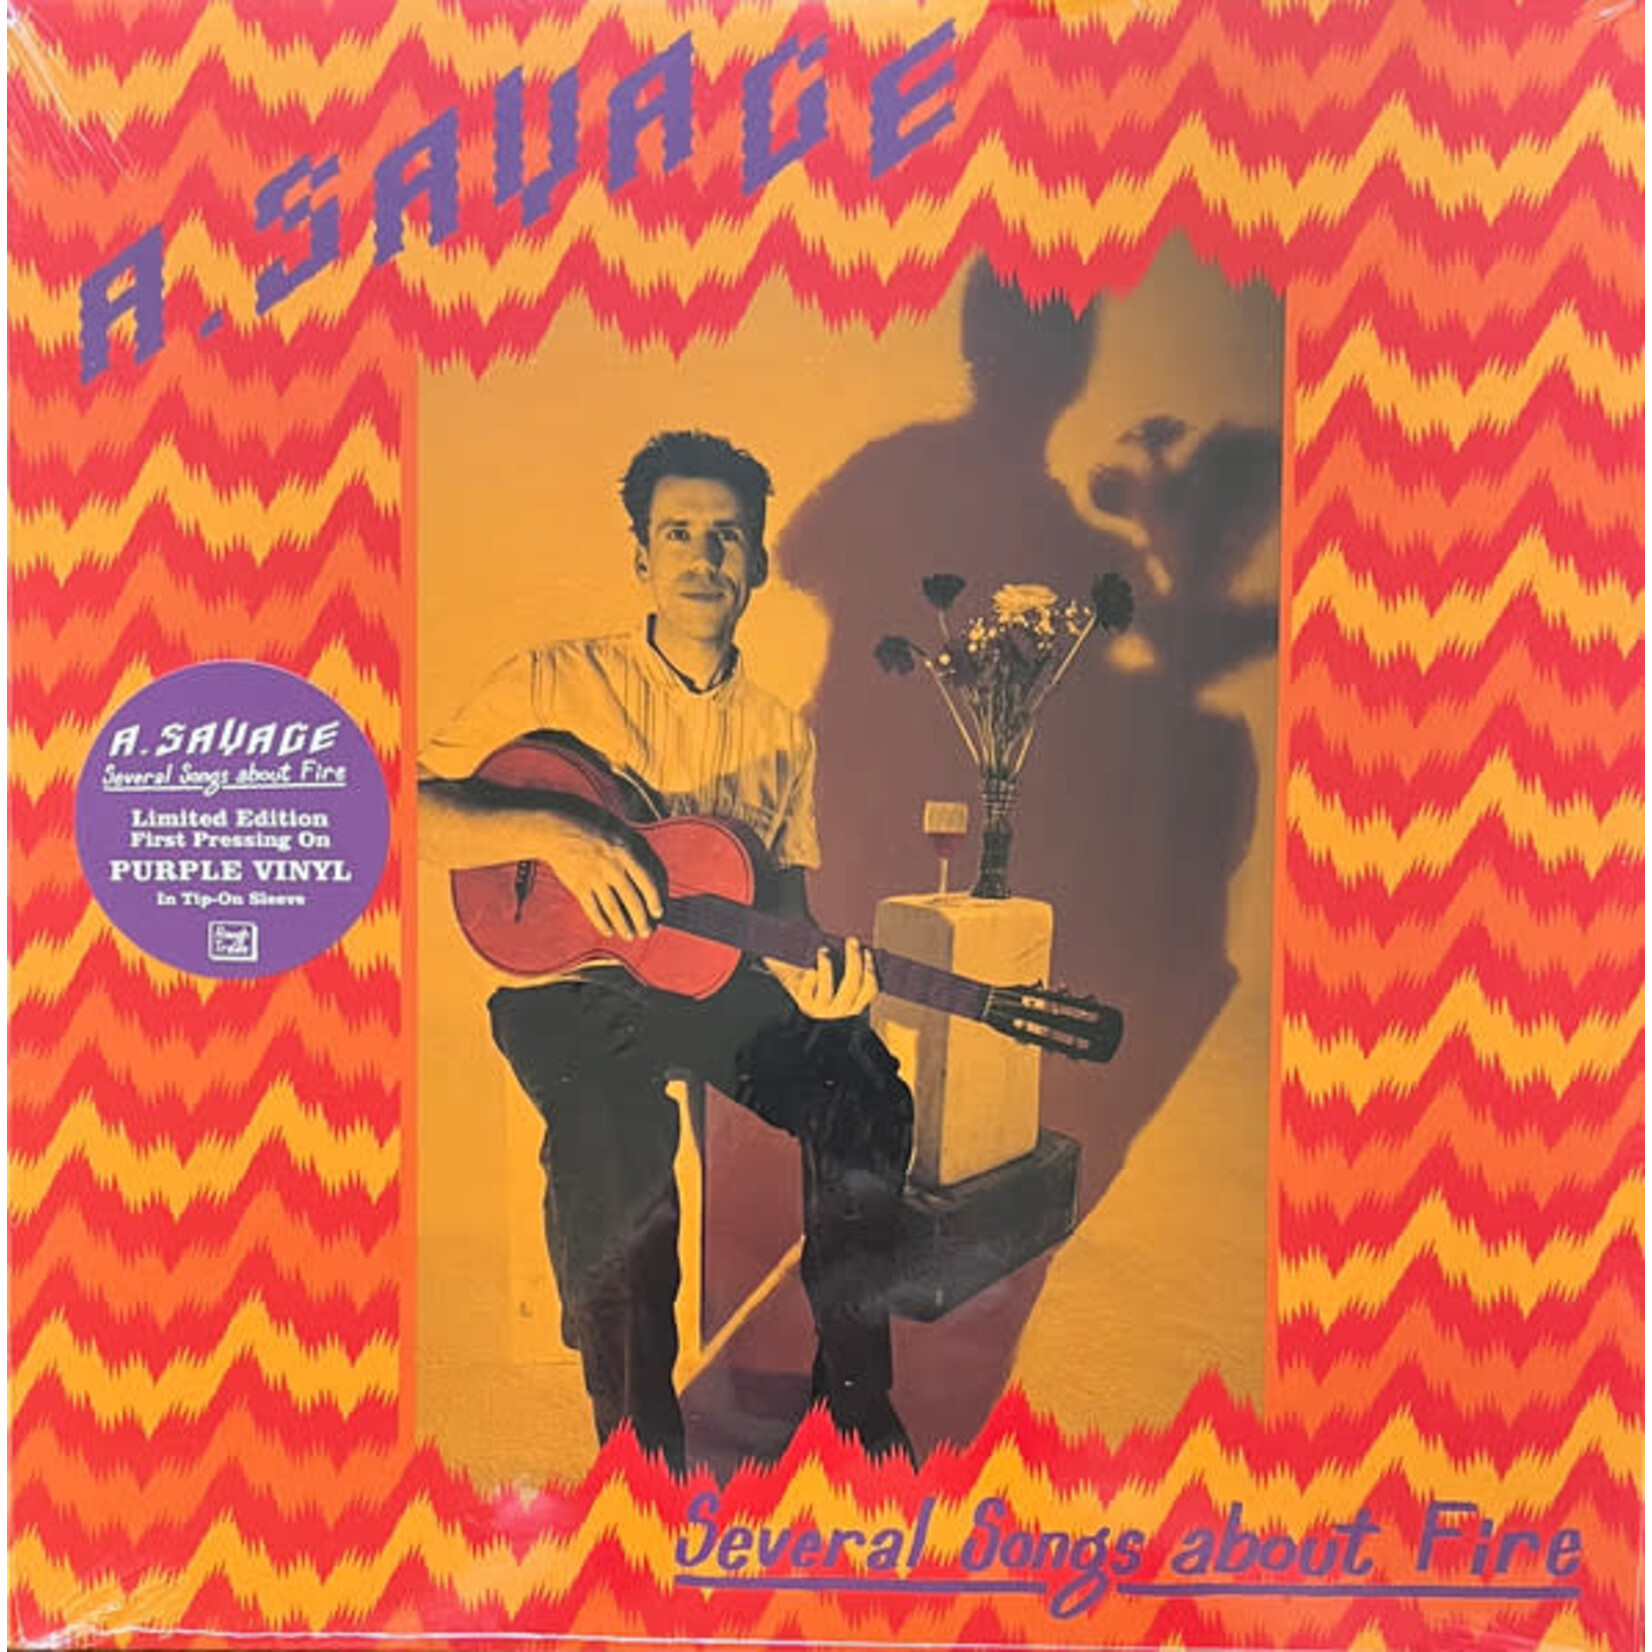 Rough Trade A Savage - Several Songs about Fire (LP) [Purple]